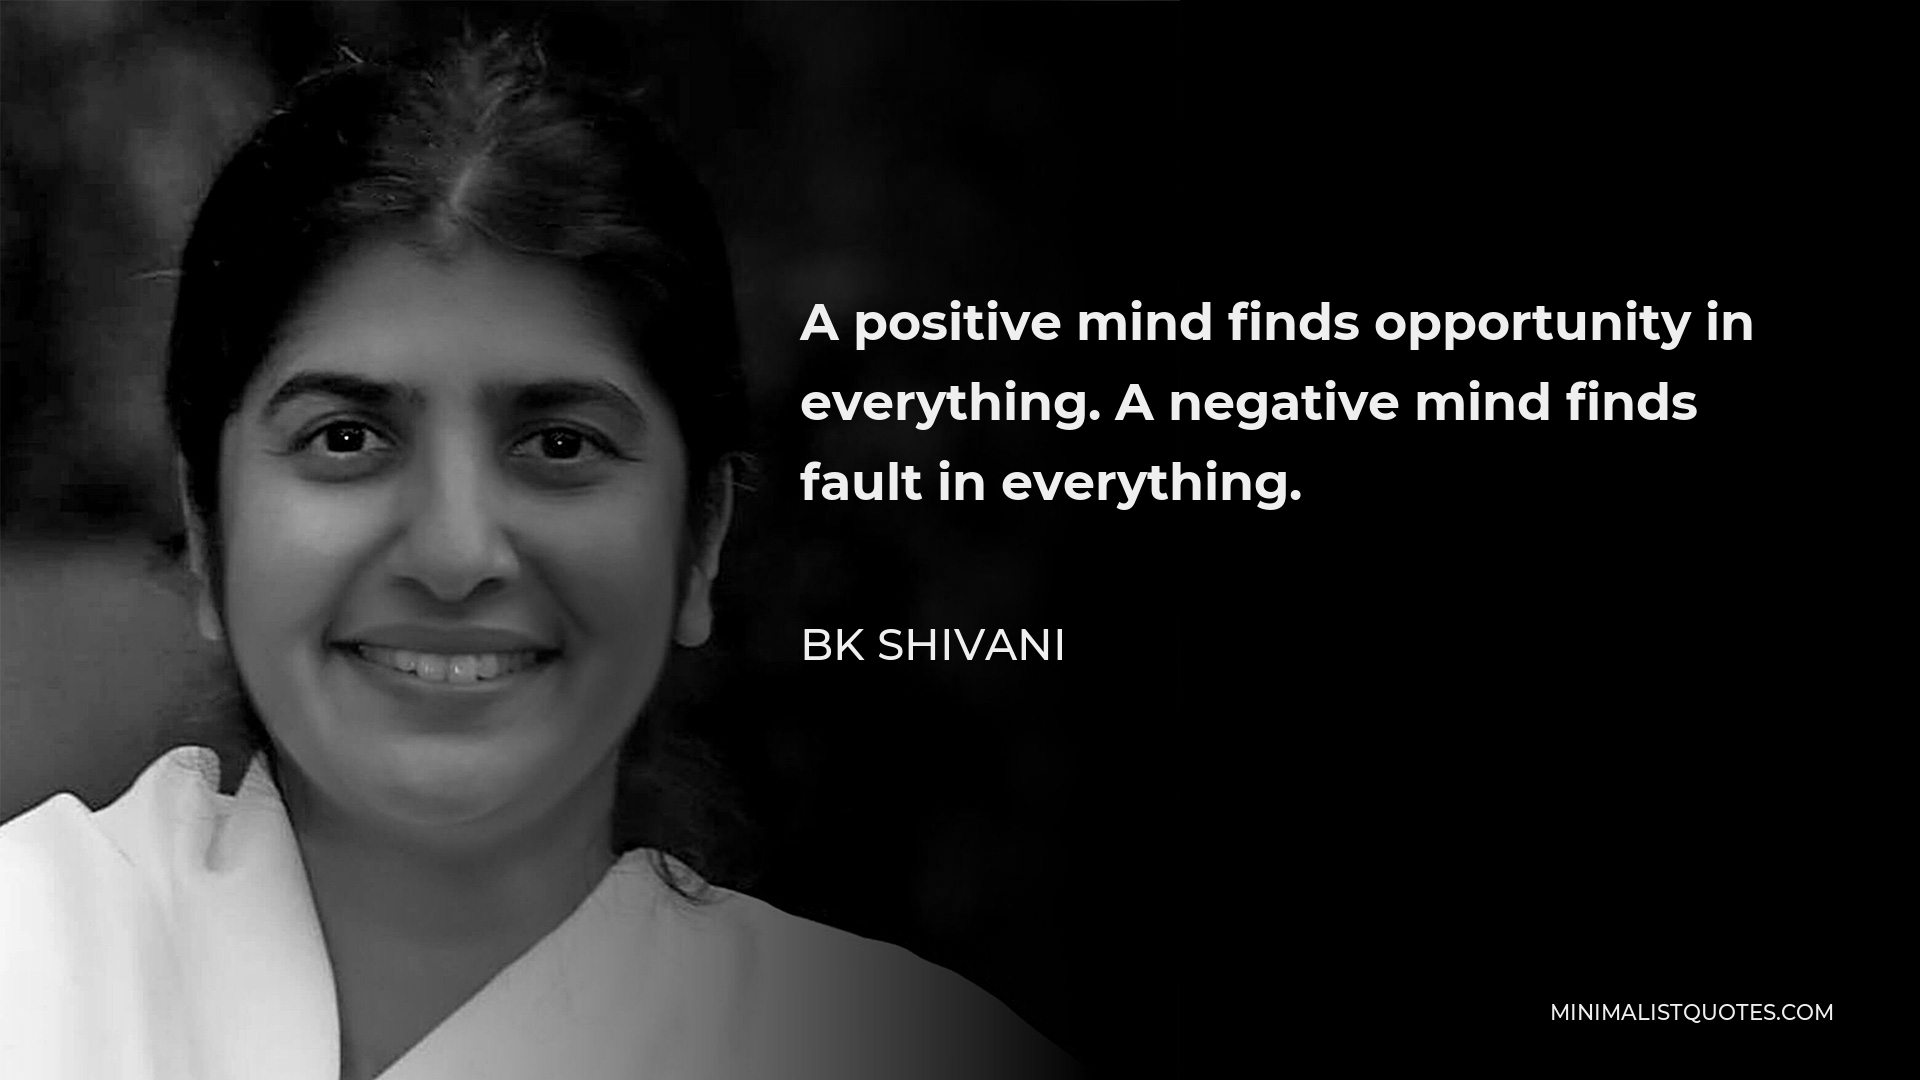 BK Shivani Quote - A positive mind finds opportunity in everything. A negative mind finds fault in everything.